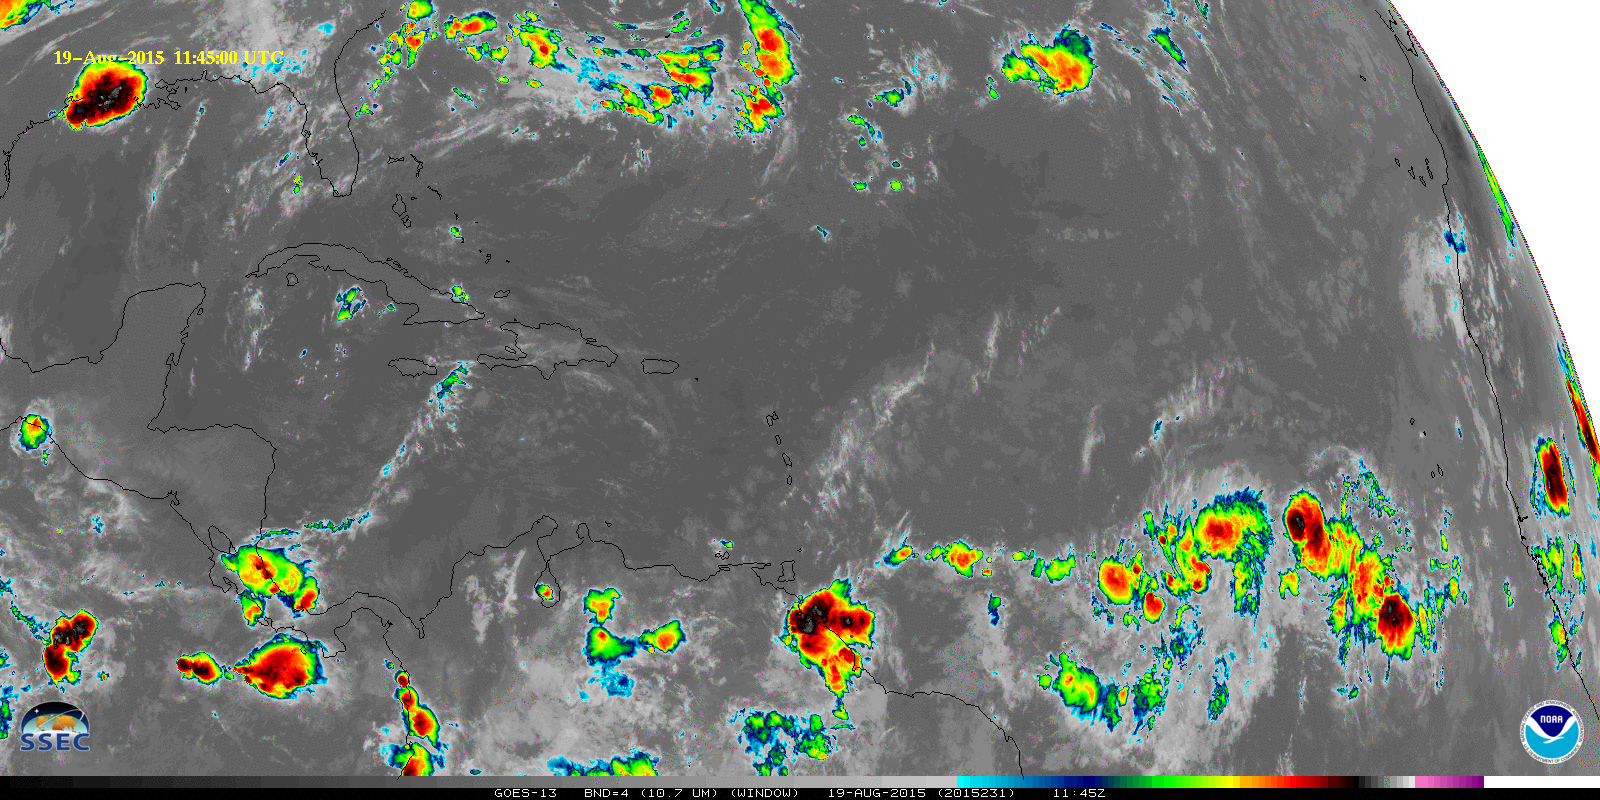 GOES-13 10.7 µm IR images [click to play animated GIF]